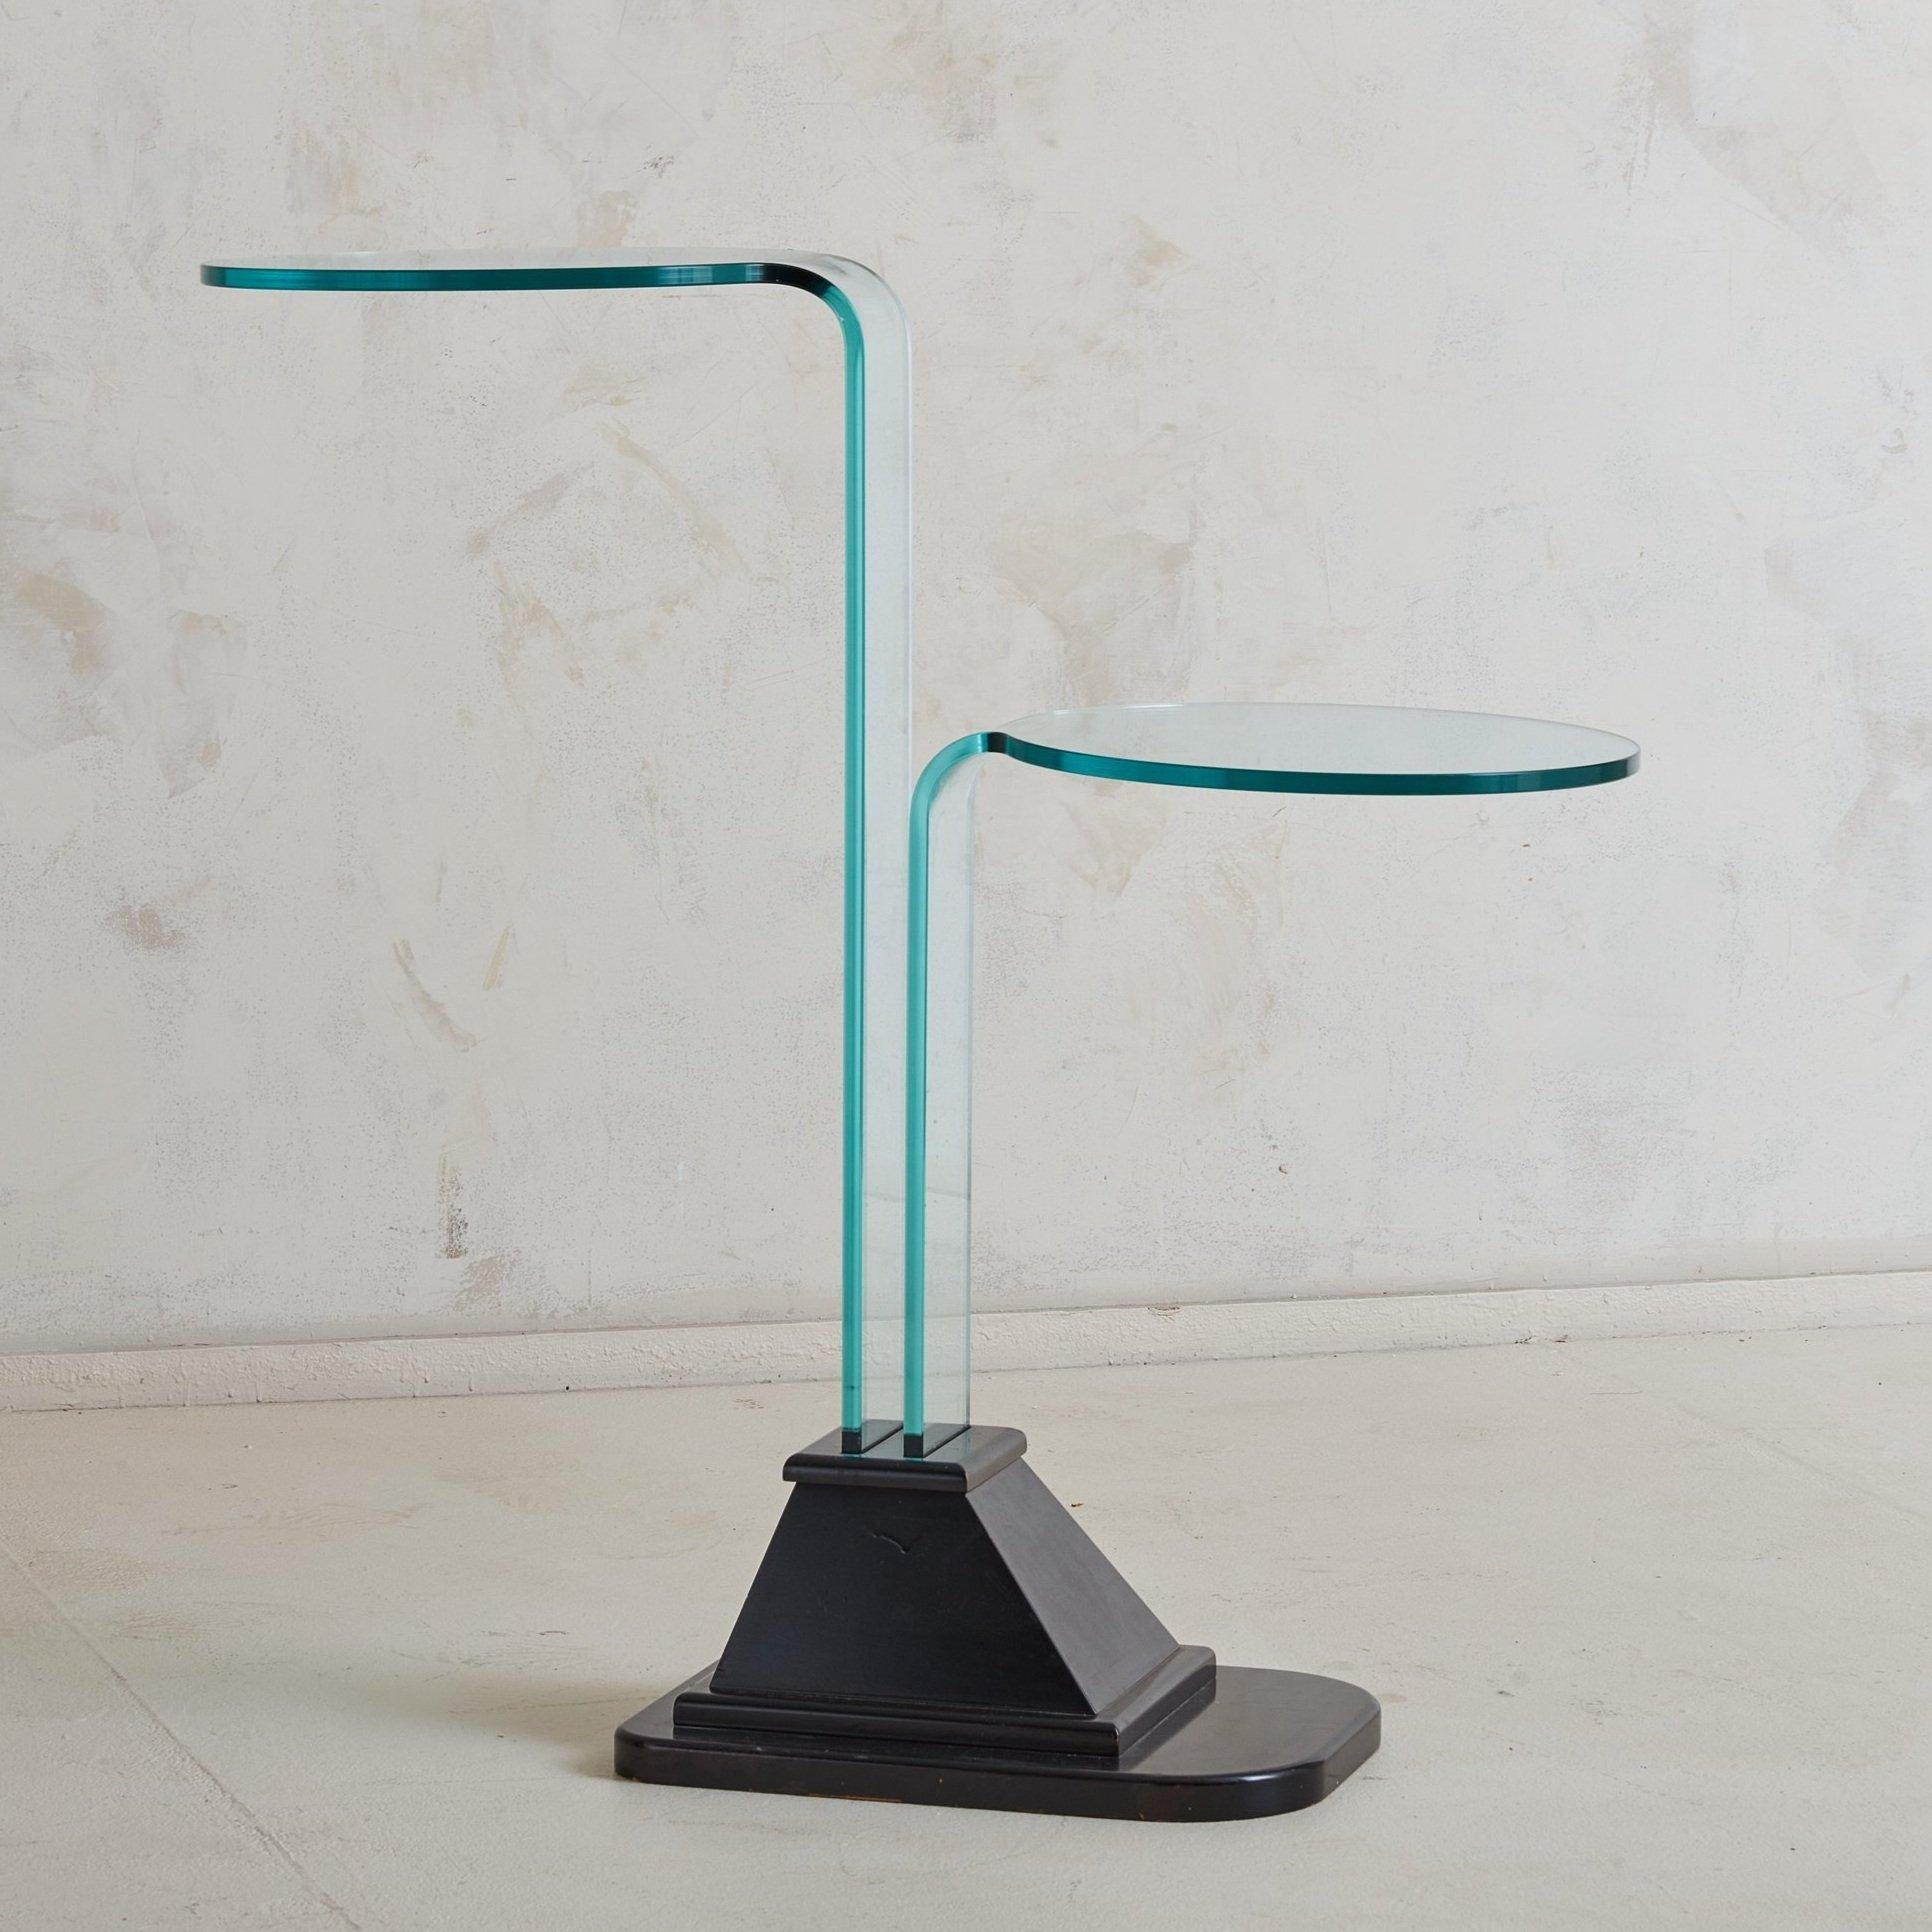 An Italian Postmodern wood and glass two tier side table from the 1980s. This table is composed of a geometric wood base and two vertical glass sheets that curve horizontally, creating surface space. The glass has a turquoise tinge, contrasting